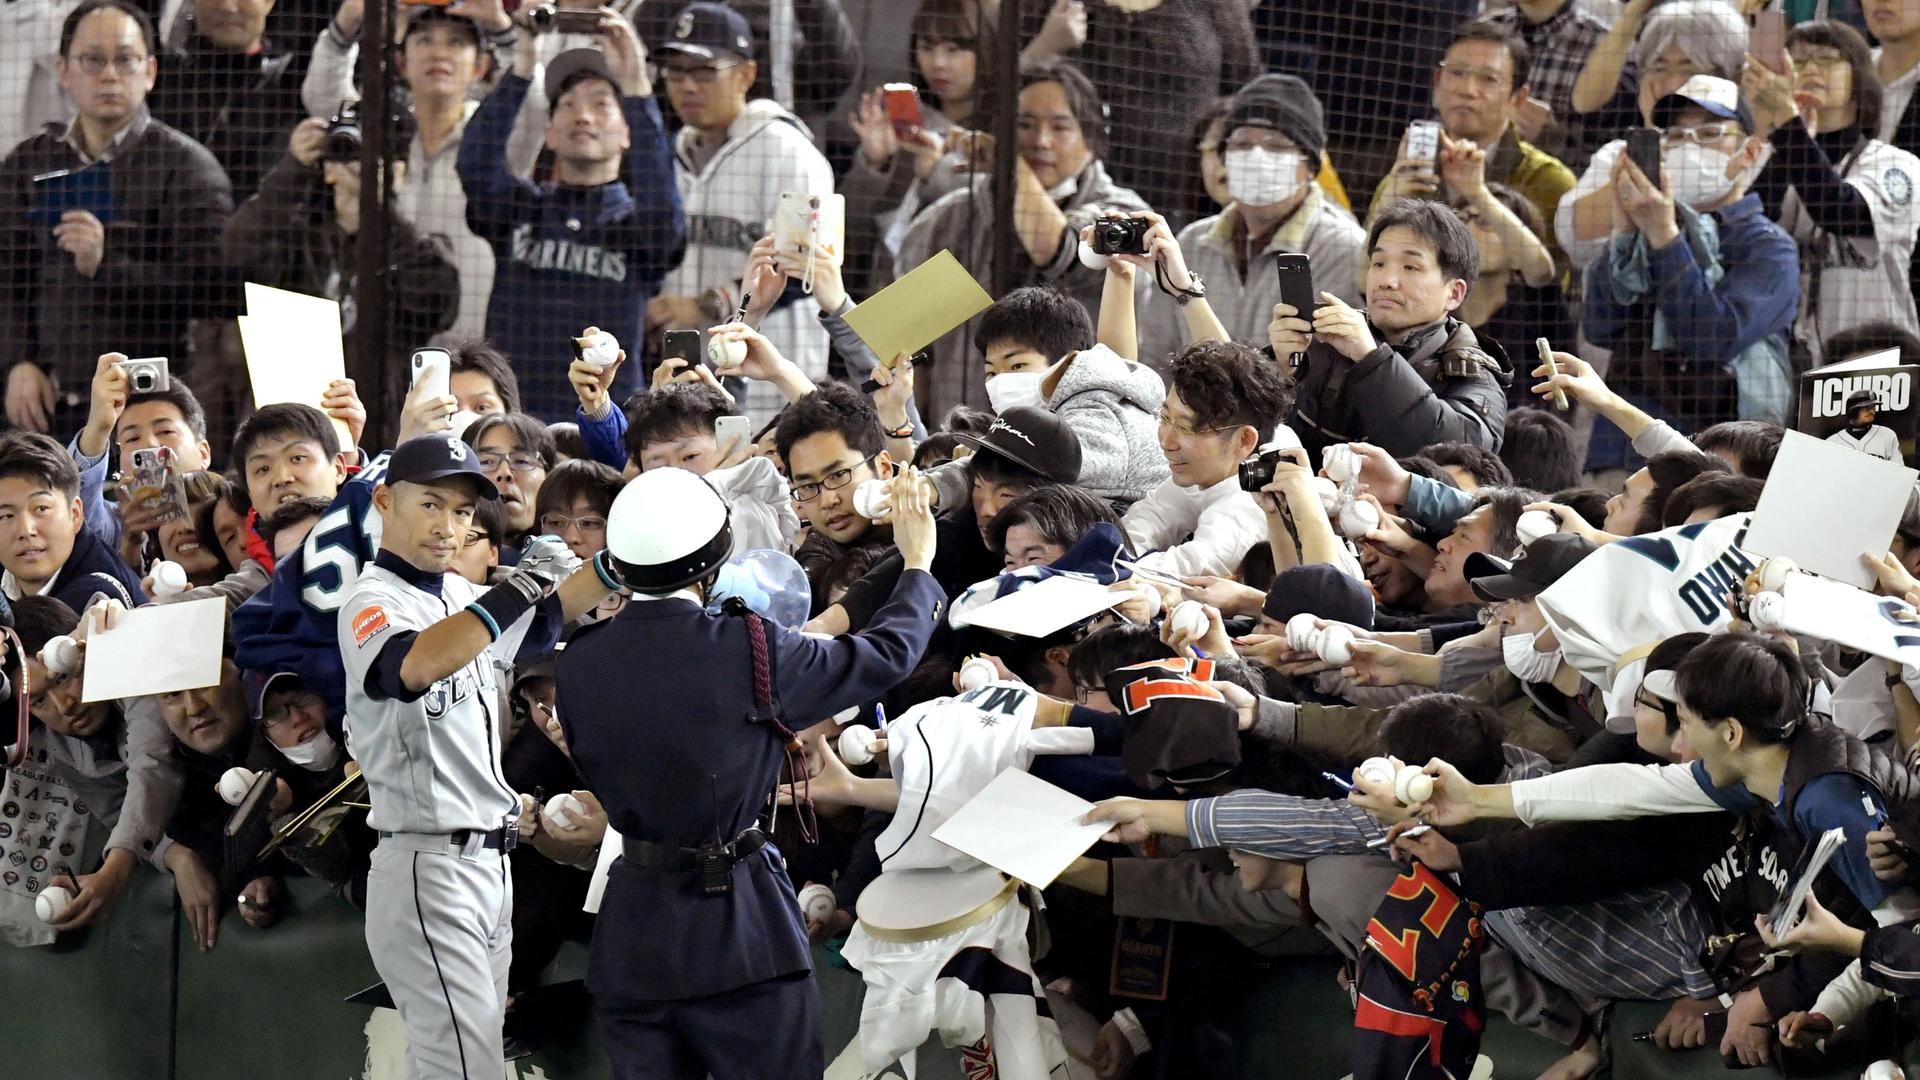 Seattle Mariners' outfielder Ichiro Suzuki gives autographs to fans before an exhbition game in Tokyo against the Yomiuri Giants, March 17, 2019.